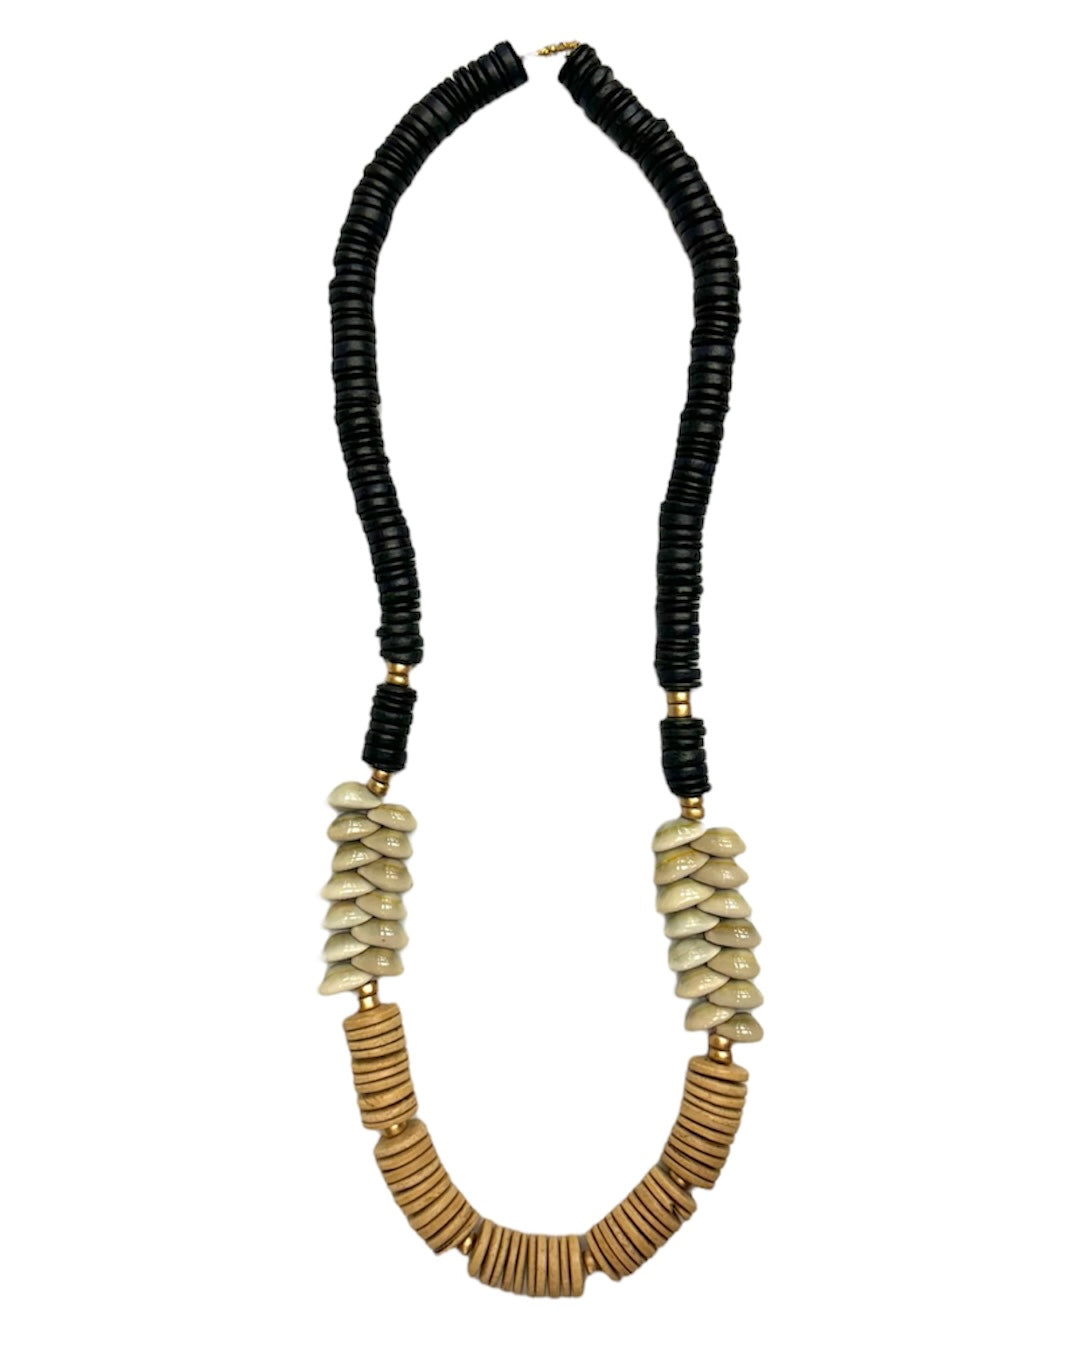 COCONUT WOOD & COWRIE SHELL NECKLACE - Black